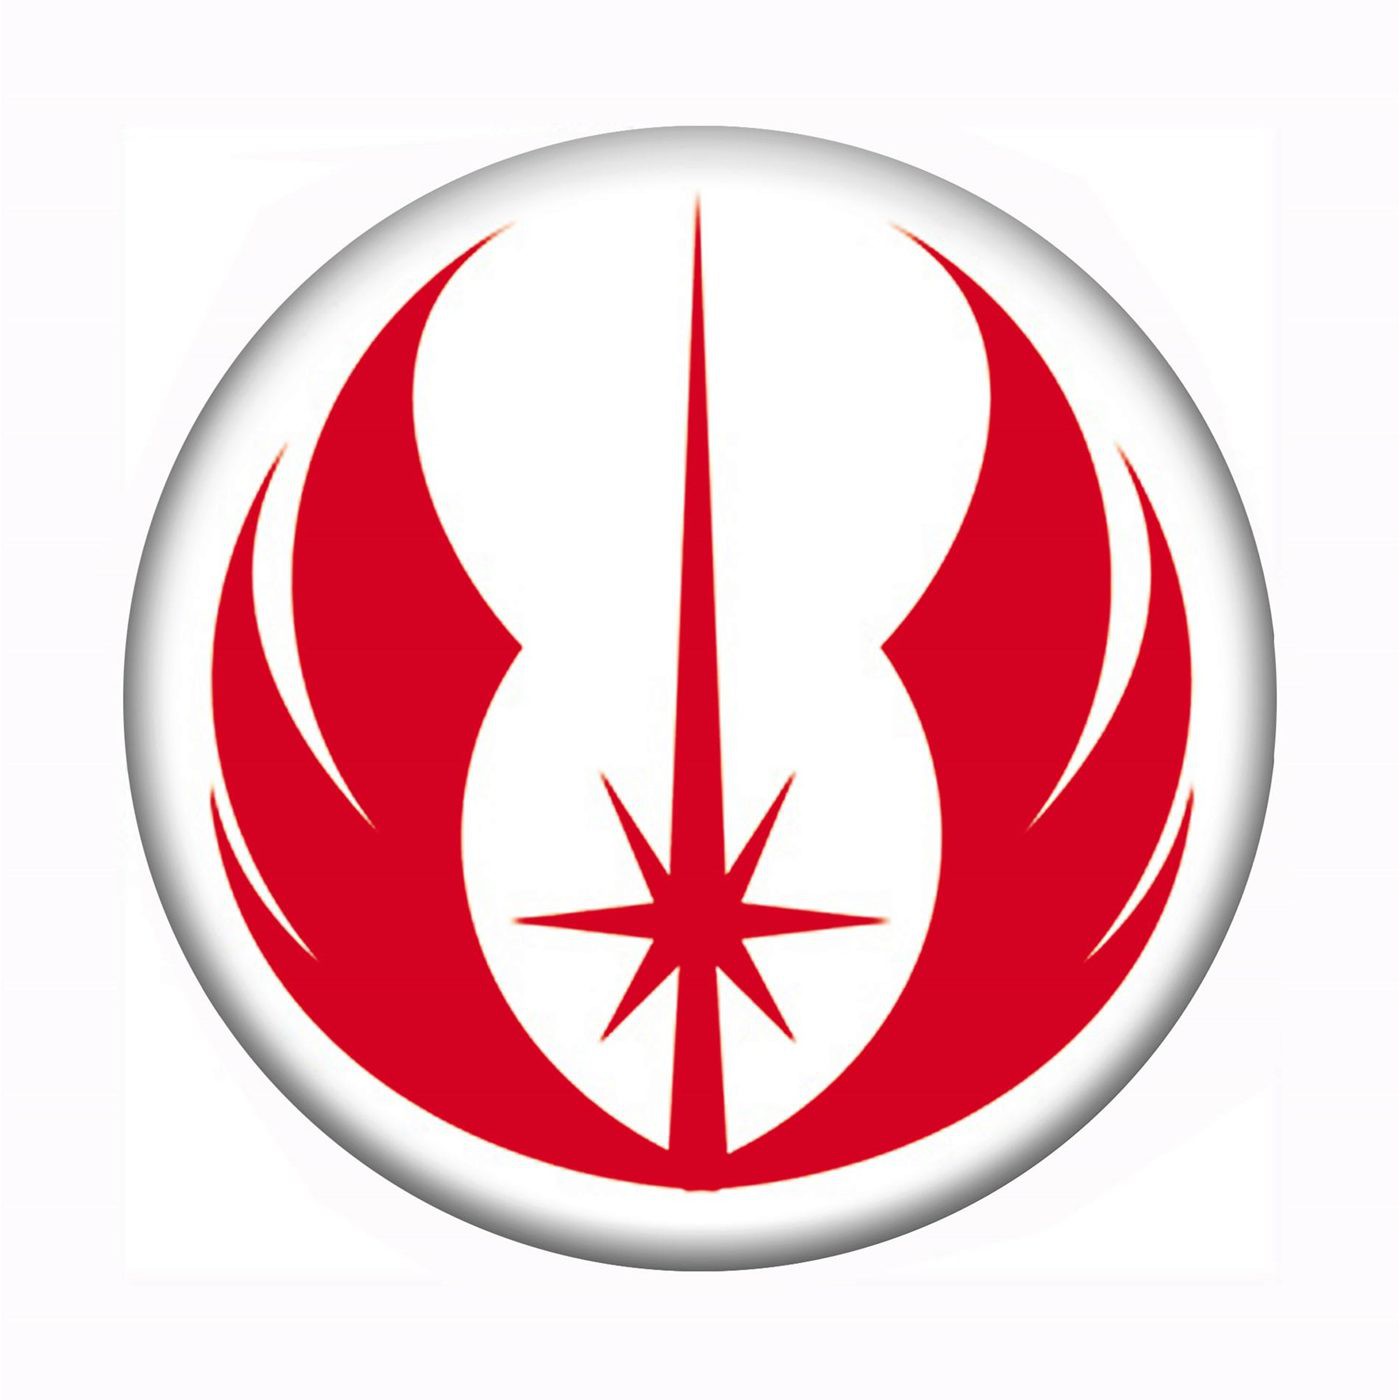 Star Wars Jedi Symbol on White Button displays the symbol of those honorabl...